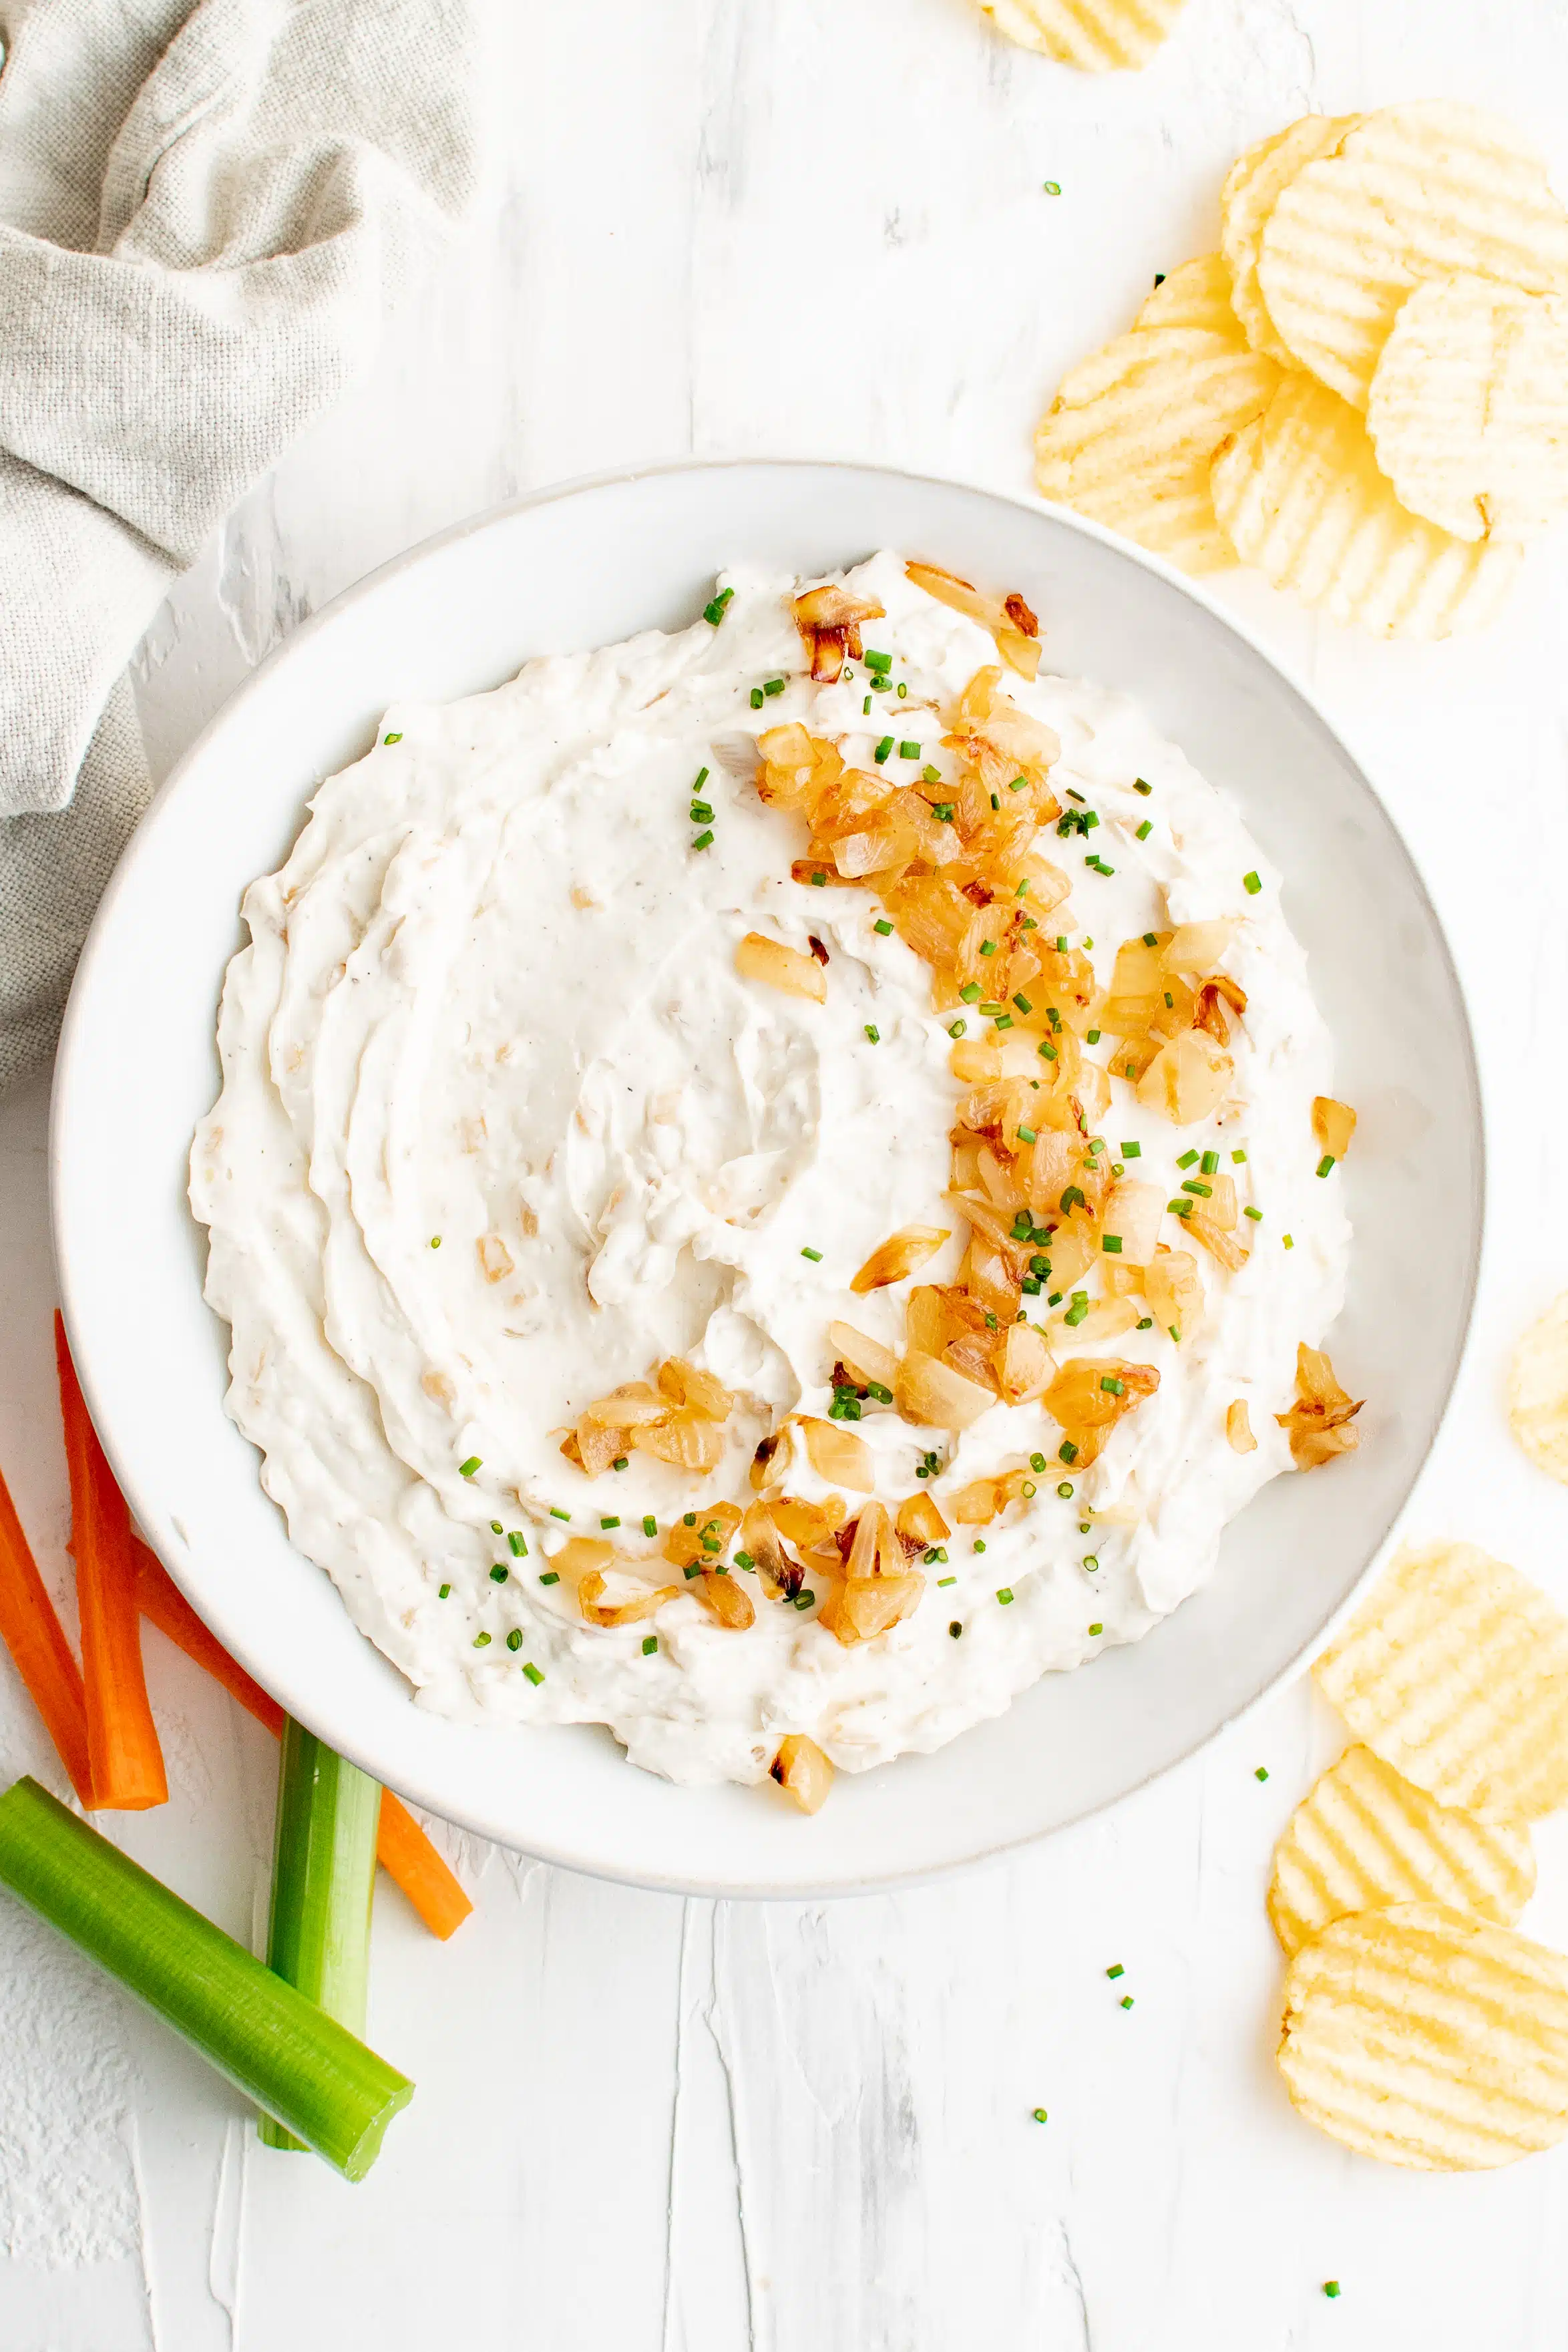 Large round white bowl filled with homemade French onion dip topped with golden caramelized onions and chopped chives on a table with potato chips and carrot and celery sticks.